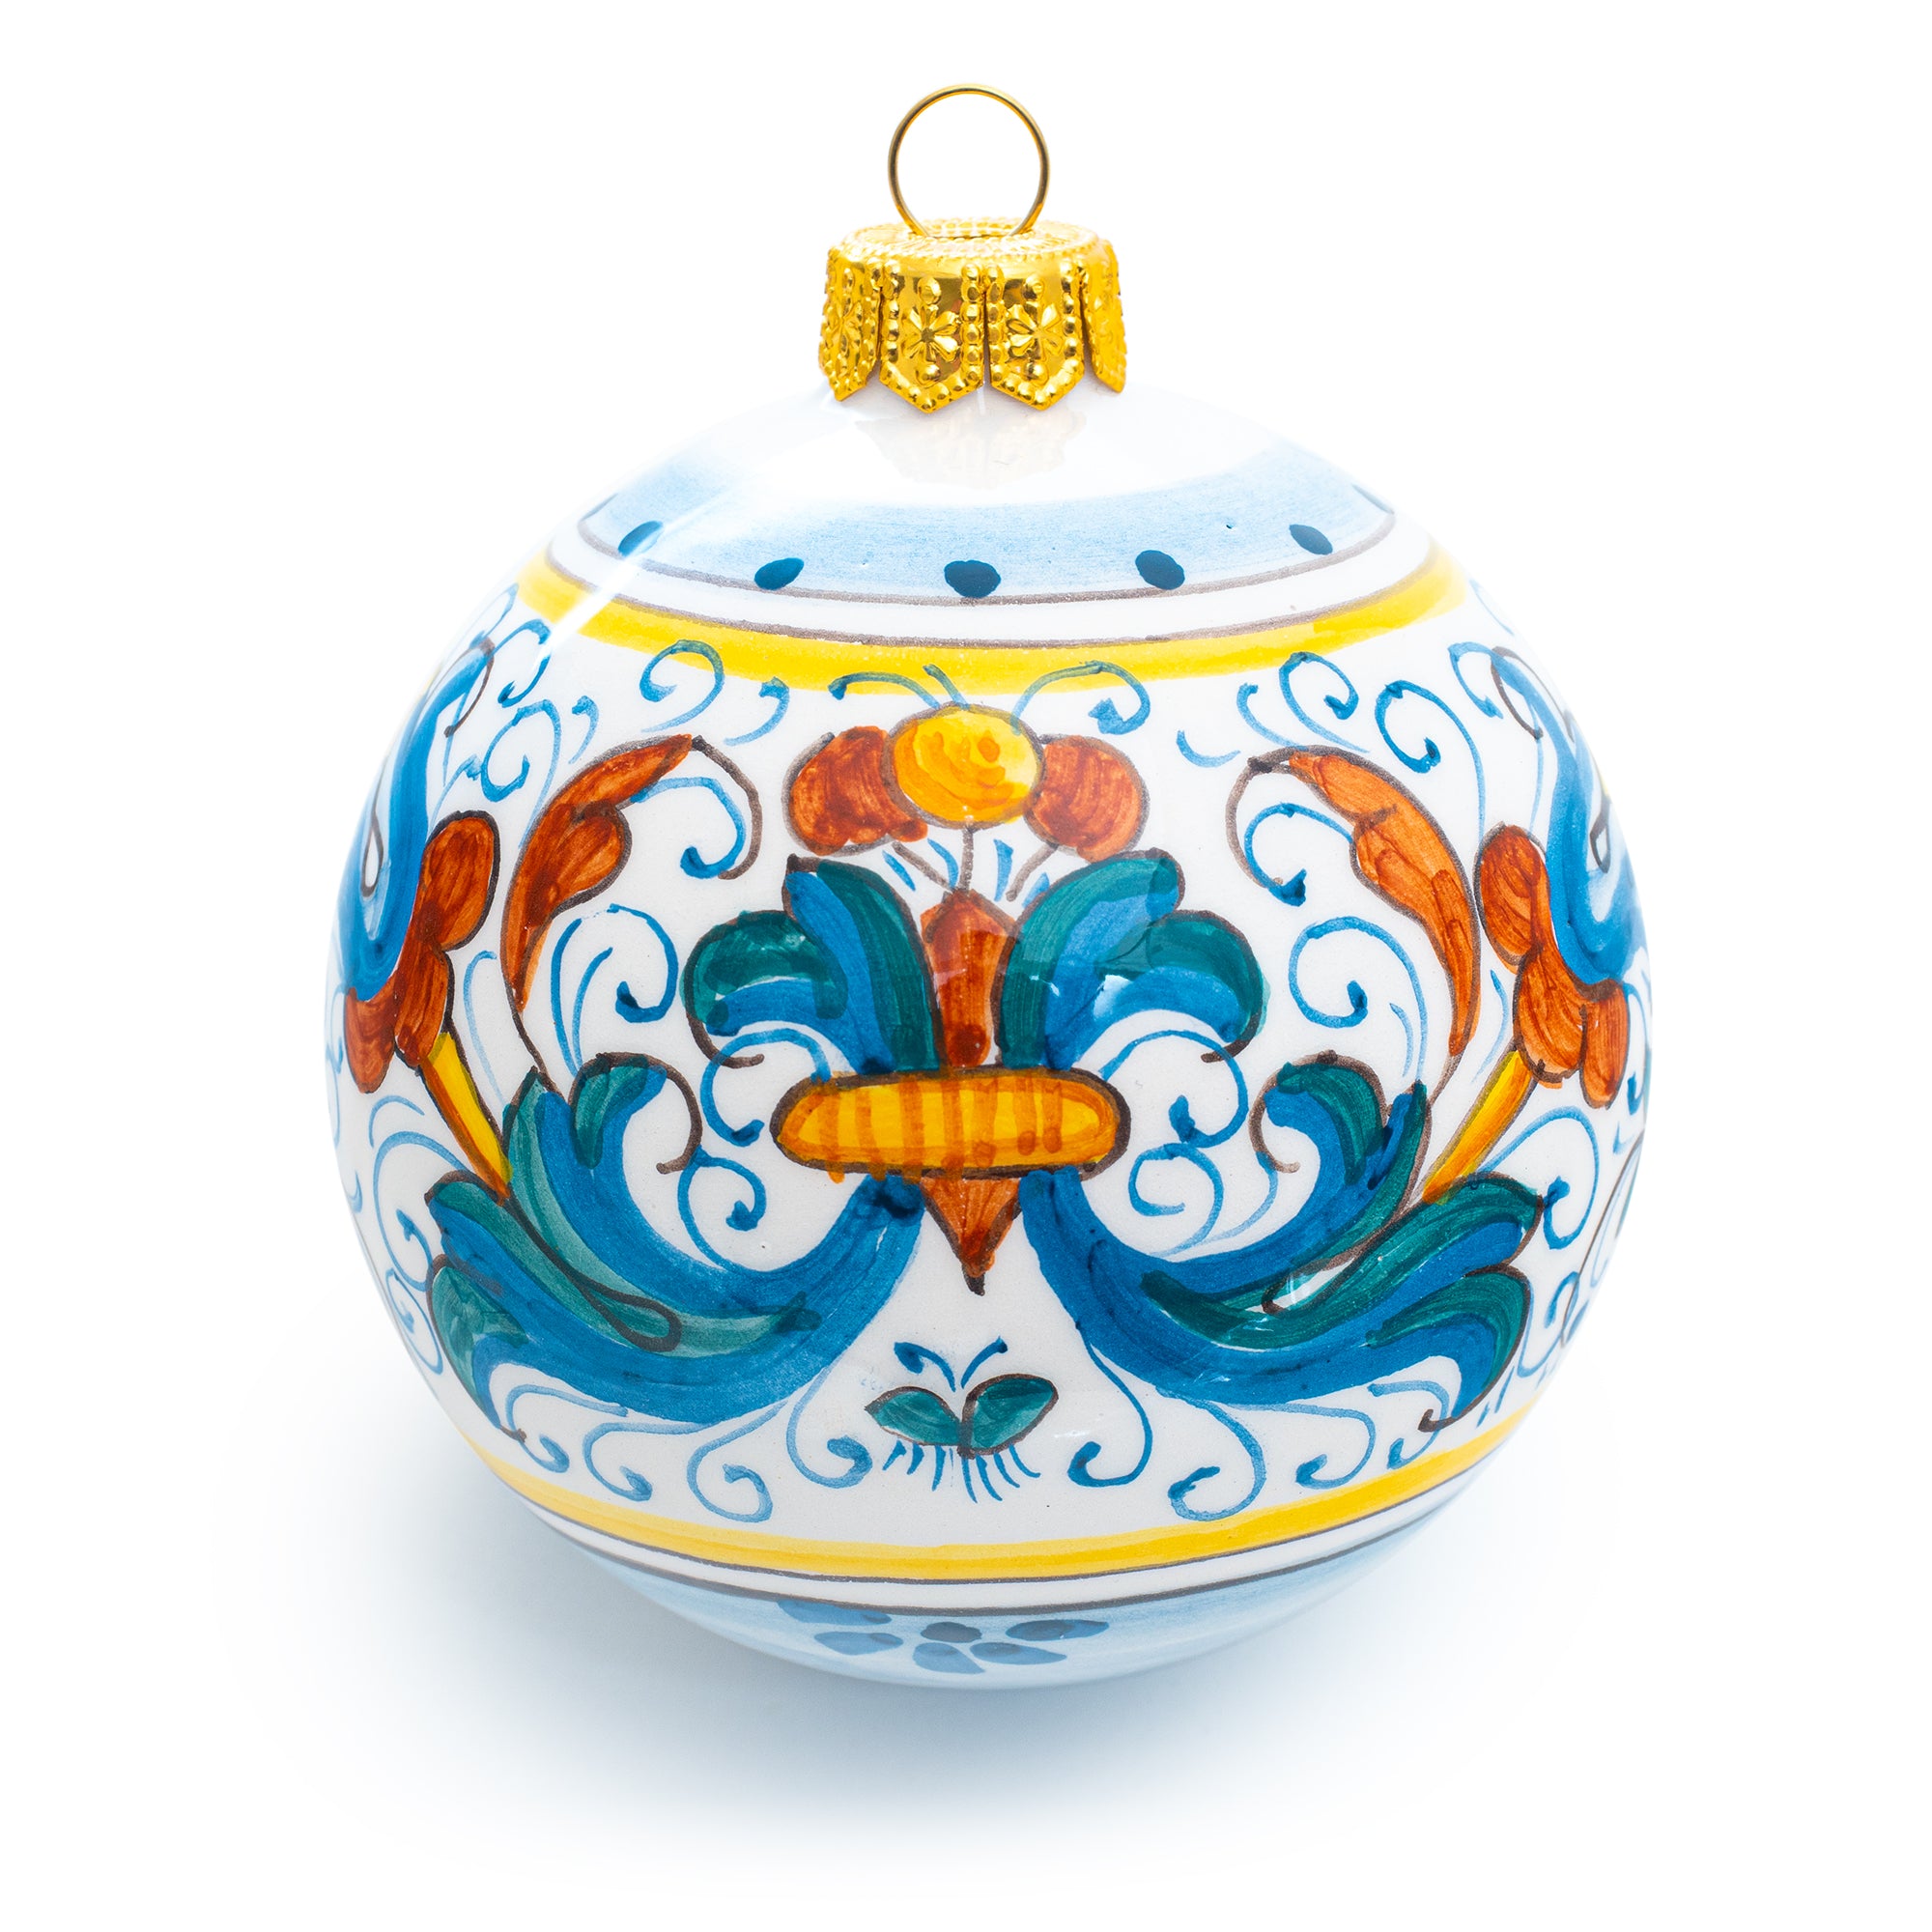 Pia's Ricco Deruta Ornament, ceramics, pottery, italian design, majolica, handmade, handcrafted, handpainted, home decor, kitchen art, home goods, deruta, majolica, Artisan, treasures, traditional art, modern art, gift ideas, style, SF, shop small business, artists, shop online, landmark store, legacy, one of a kind, limited edition, gift guide, gift shop, retail shop, decorations, shopping, italy, home staging, home decorating, home interiors